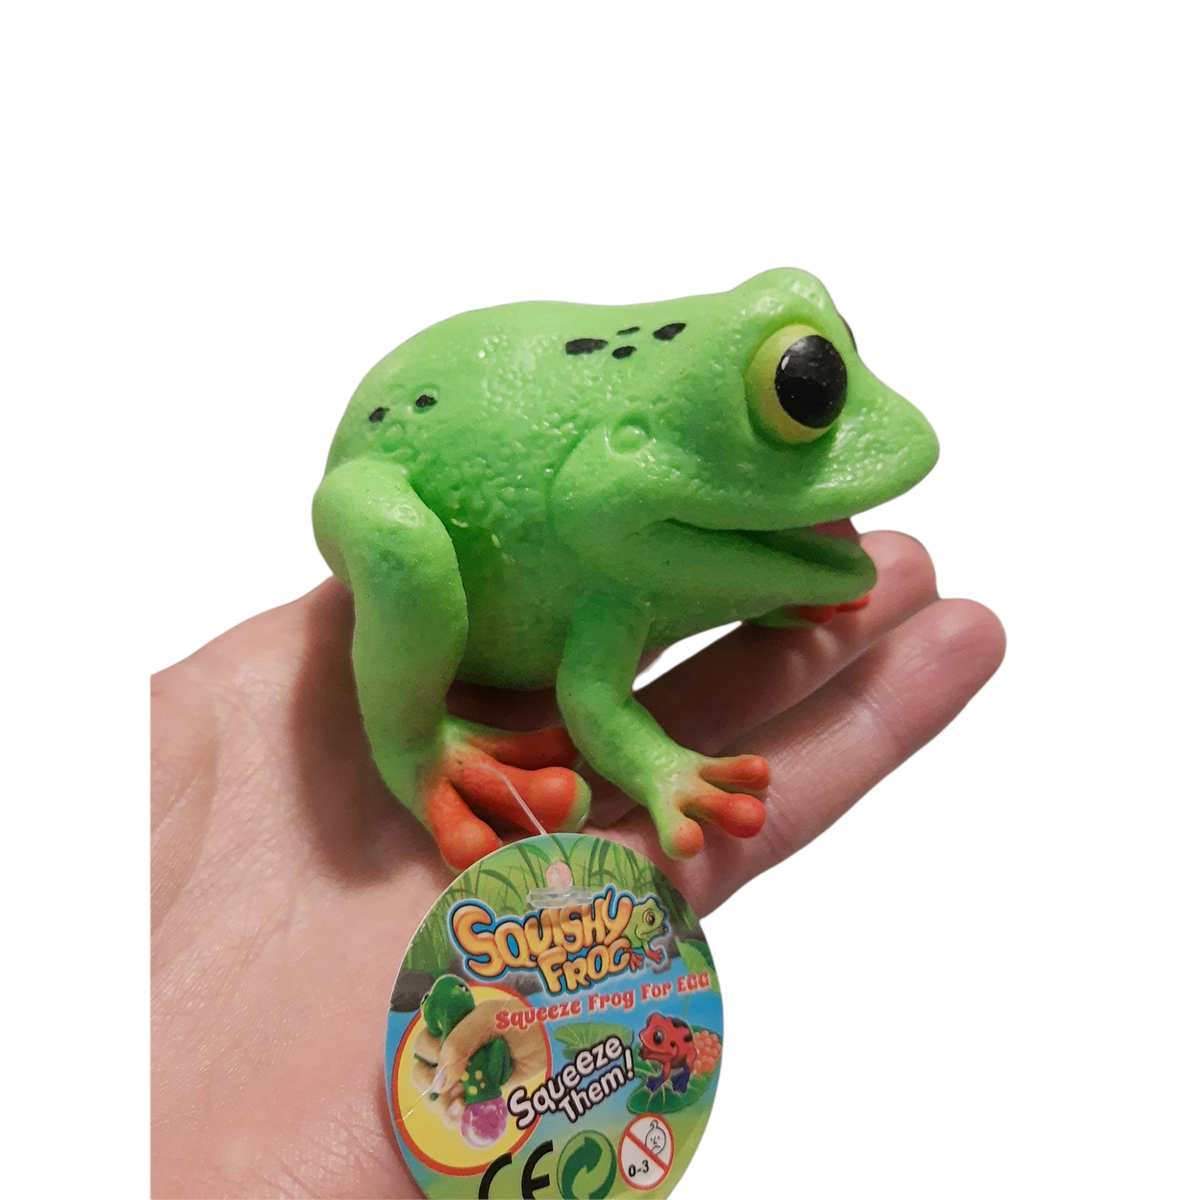 Squishy Frog Fidget Toy With Sensory Water Beads Ingested And Anti